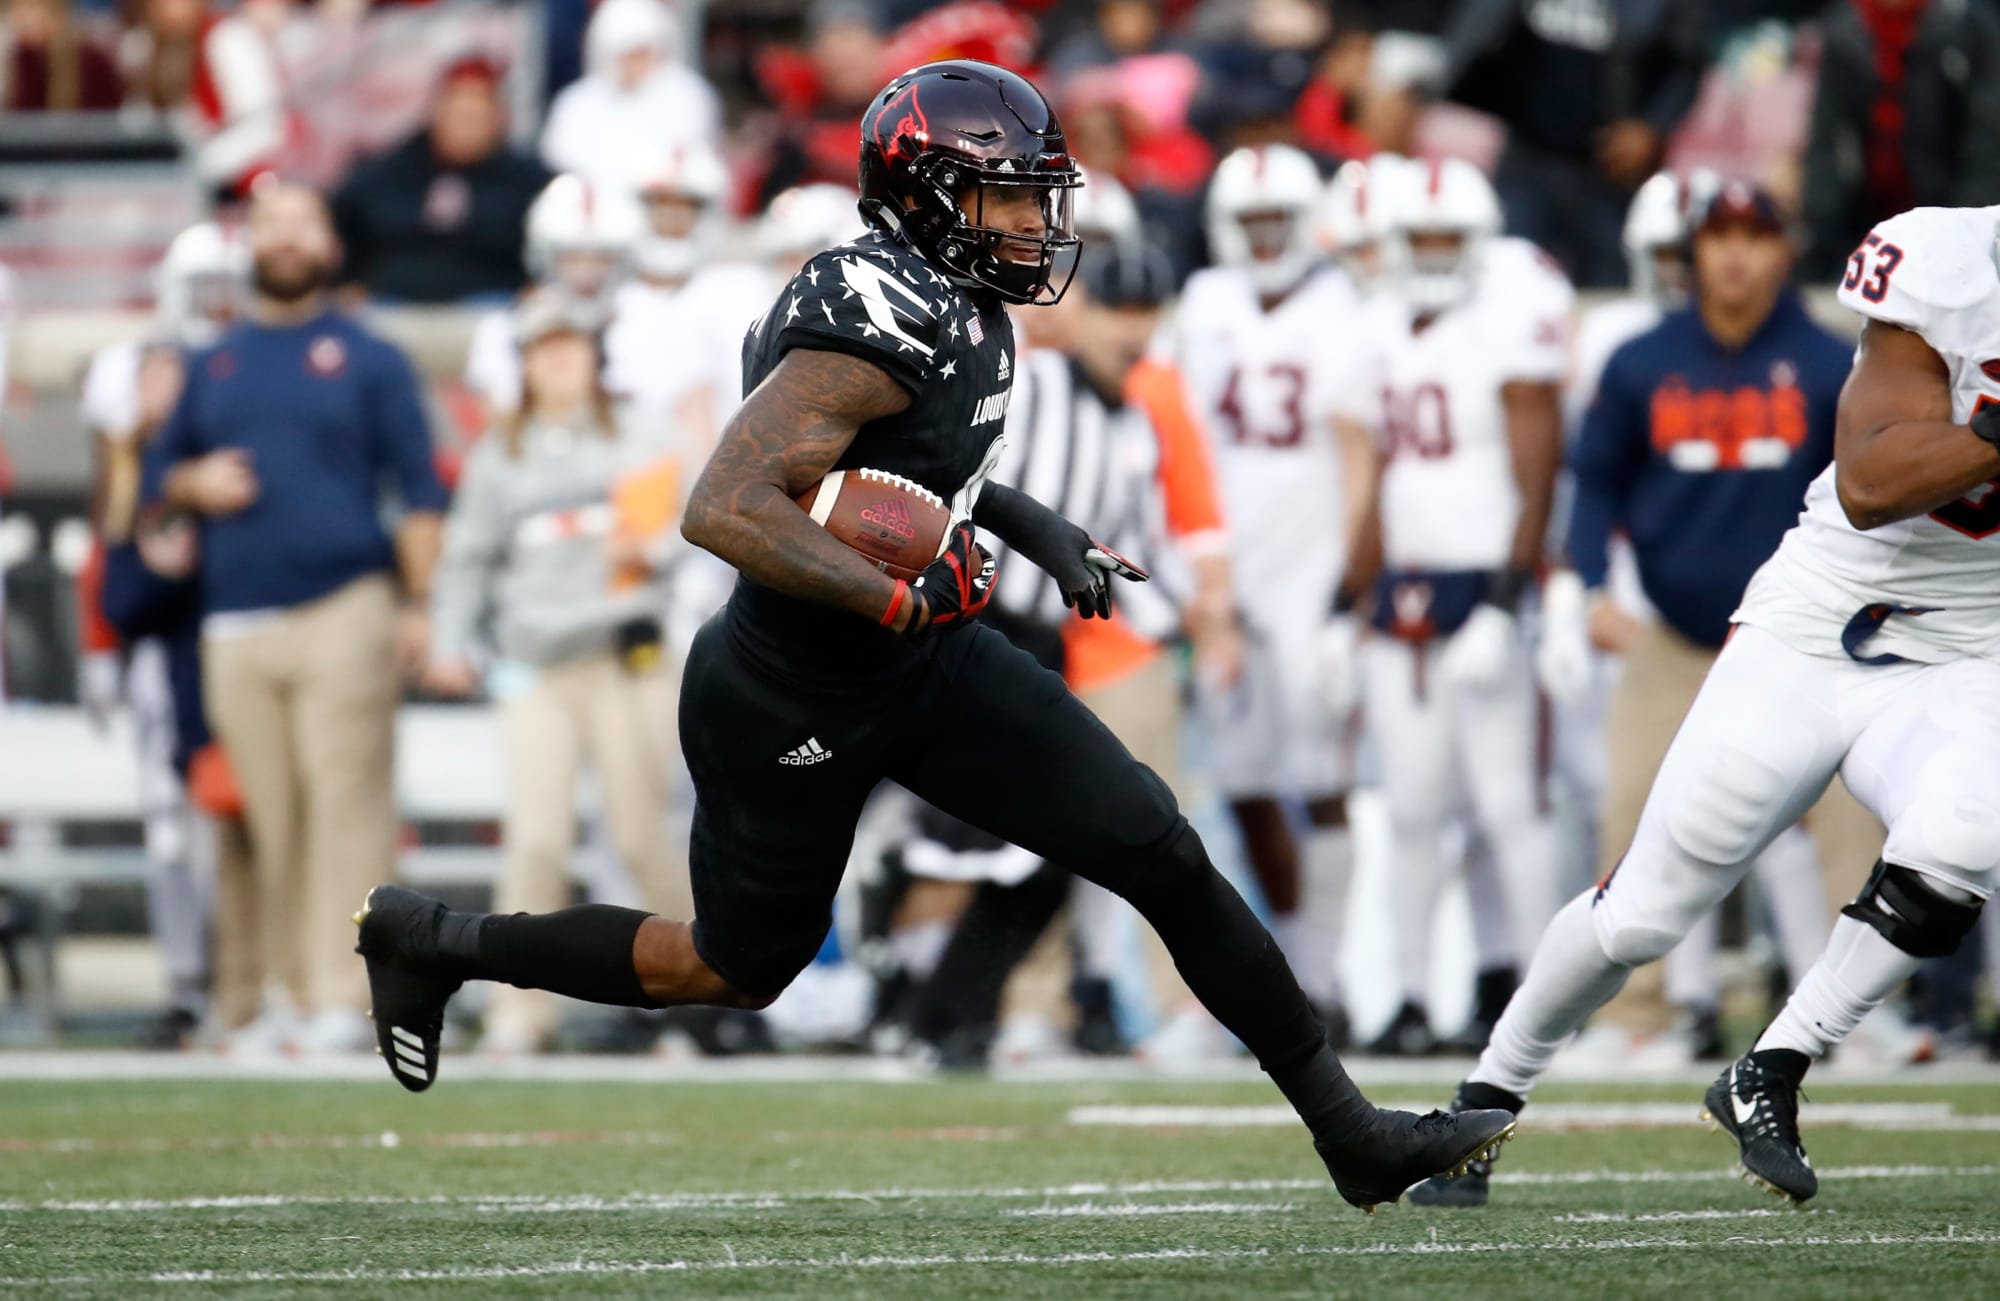 Jaylen Smith needs strong Combine performance after Senior Bowl